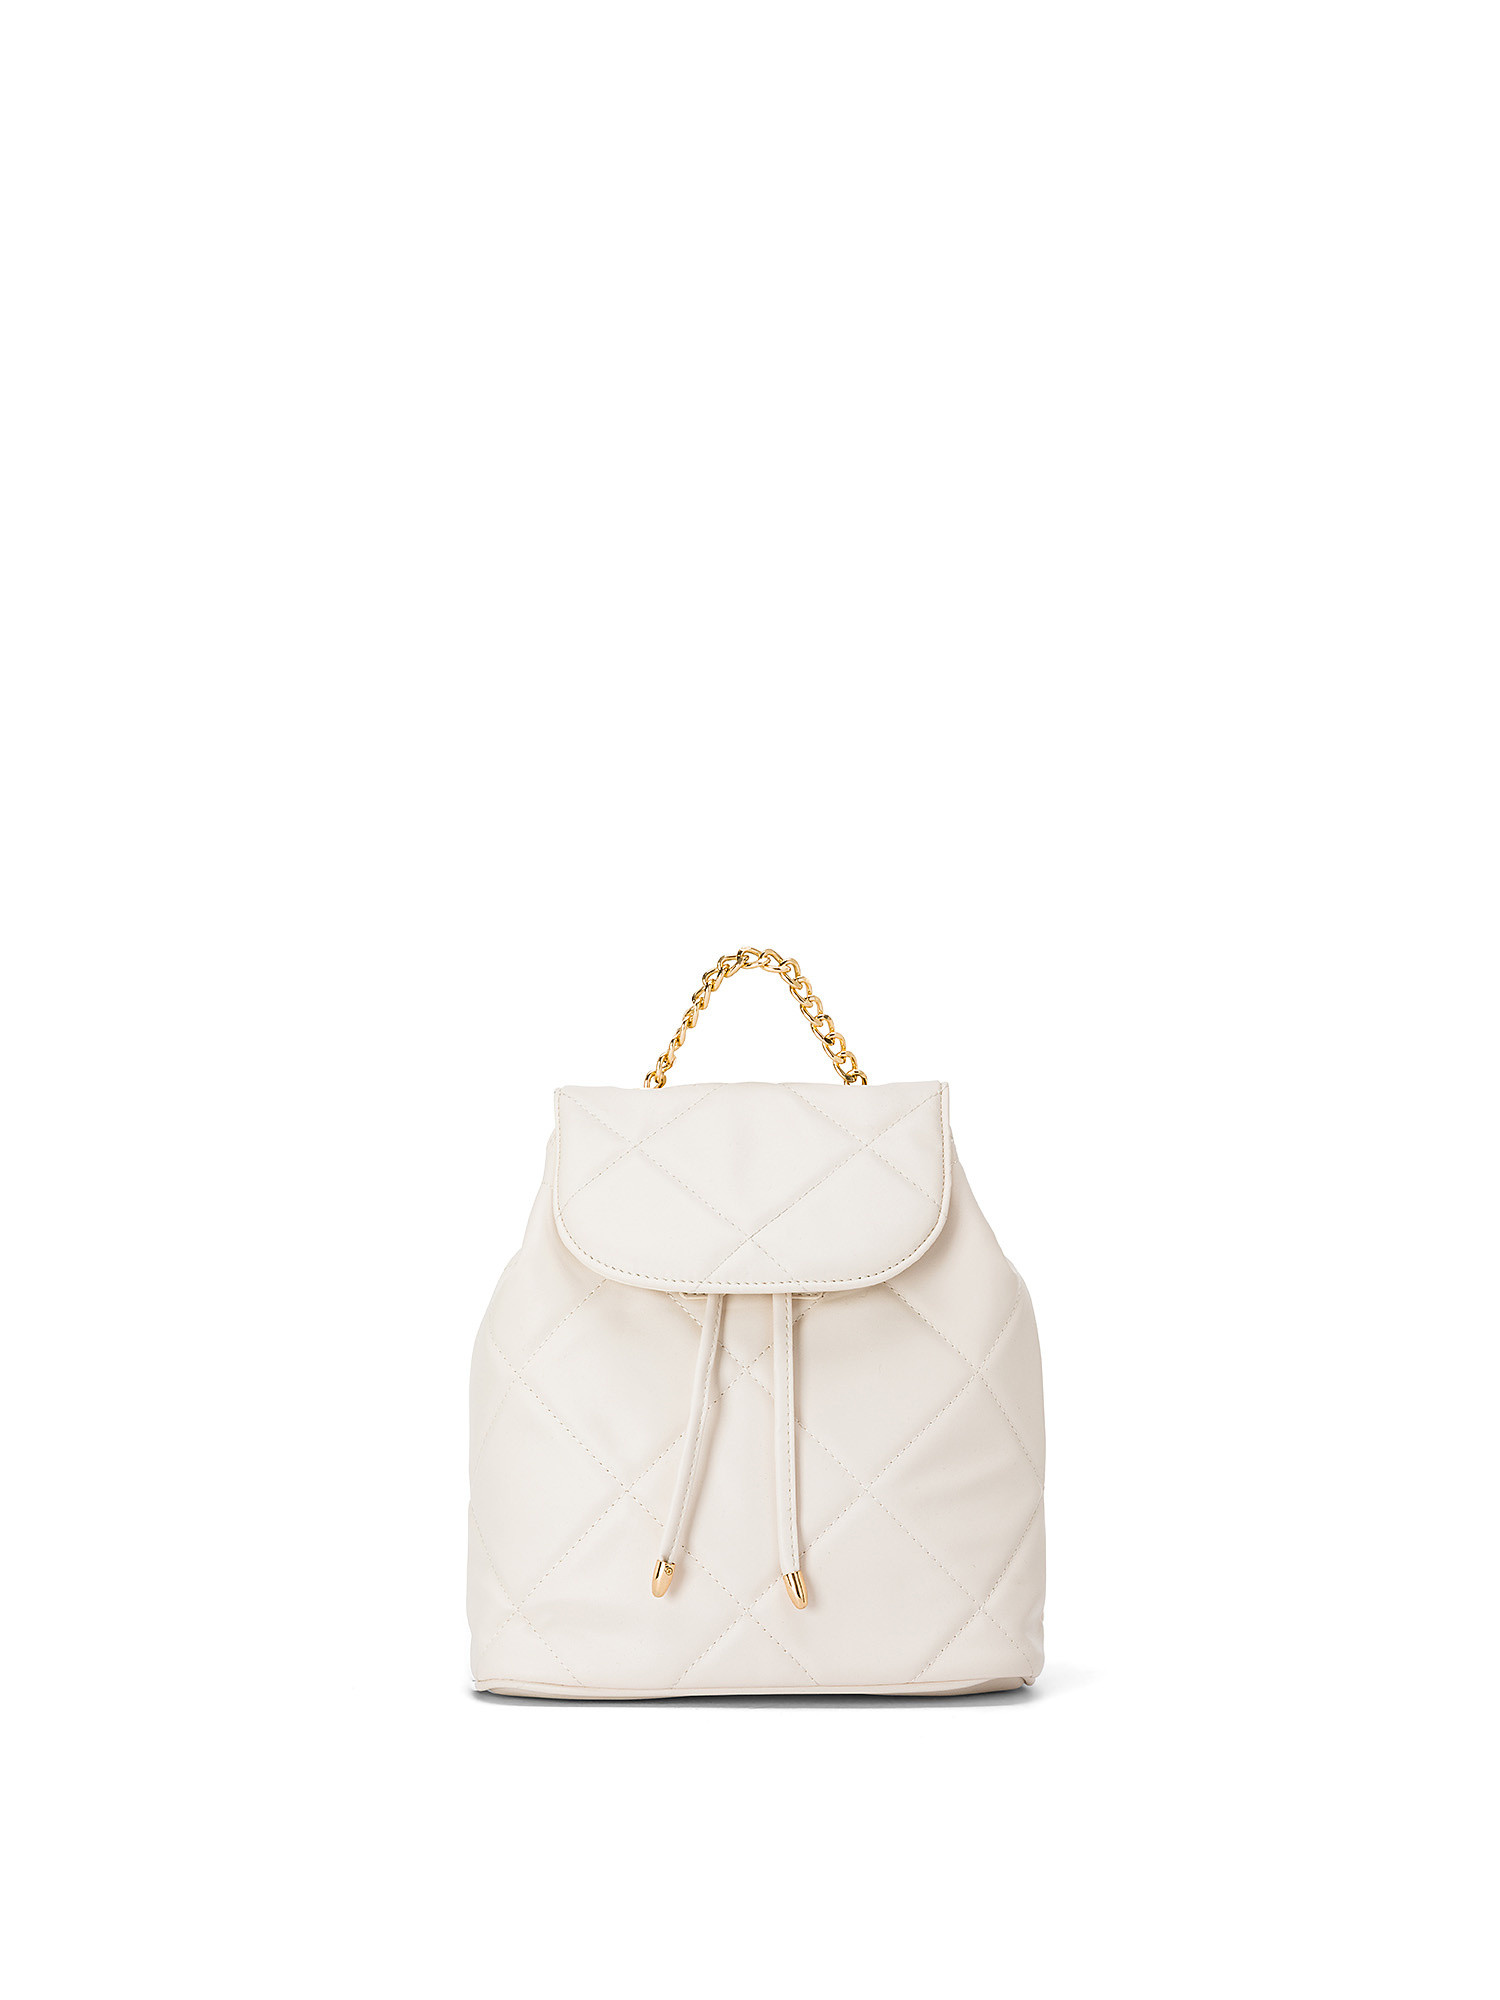 Koan - Quilted backpack with chain, White, large image number 0